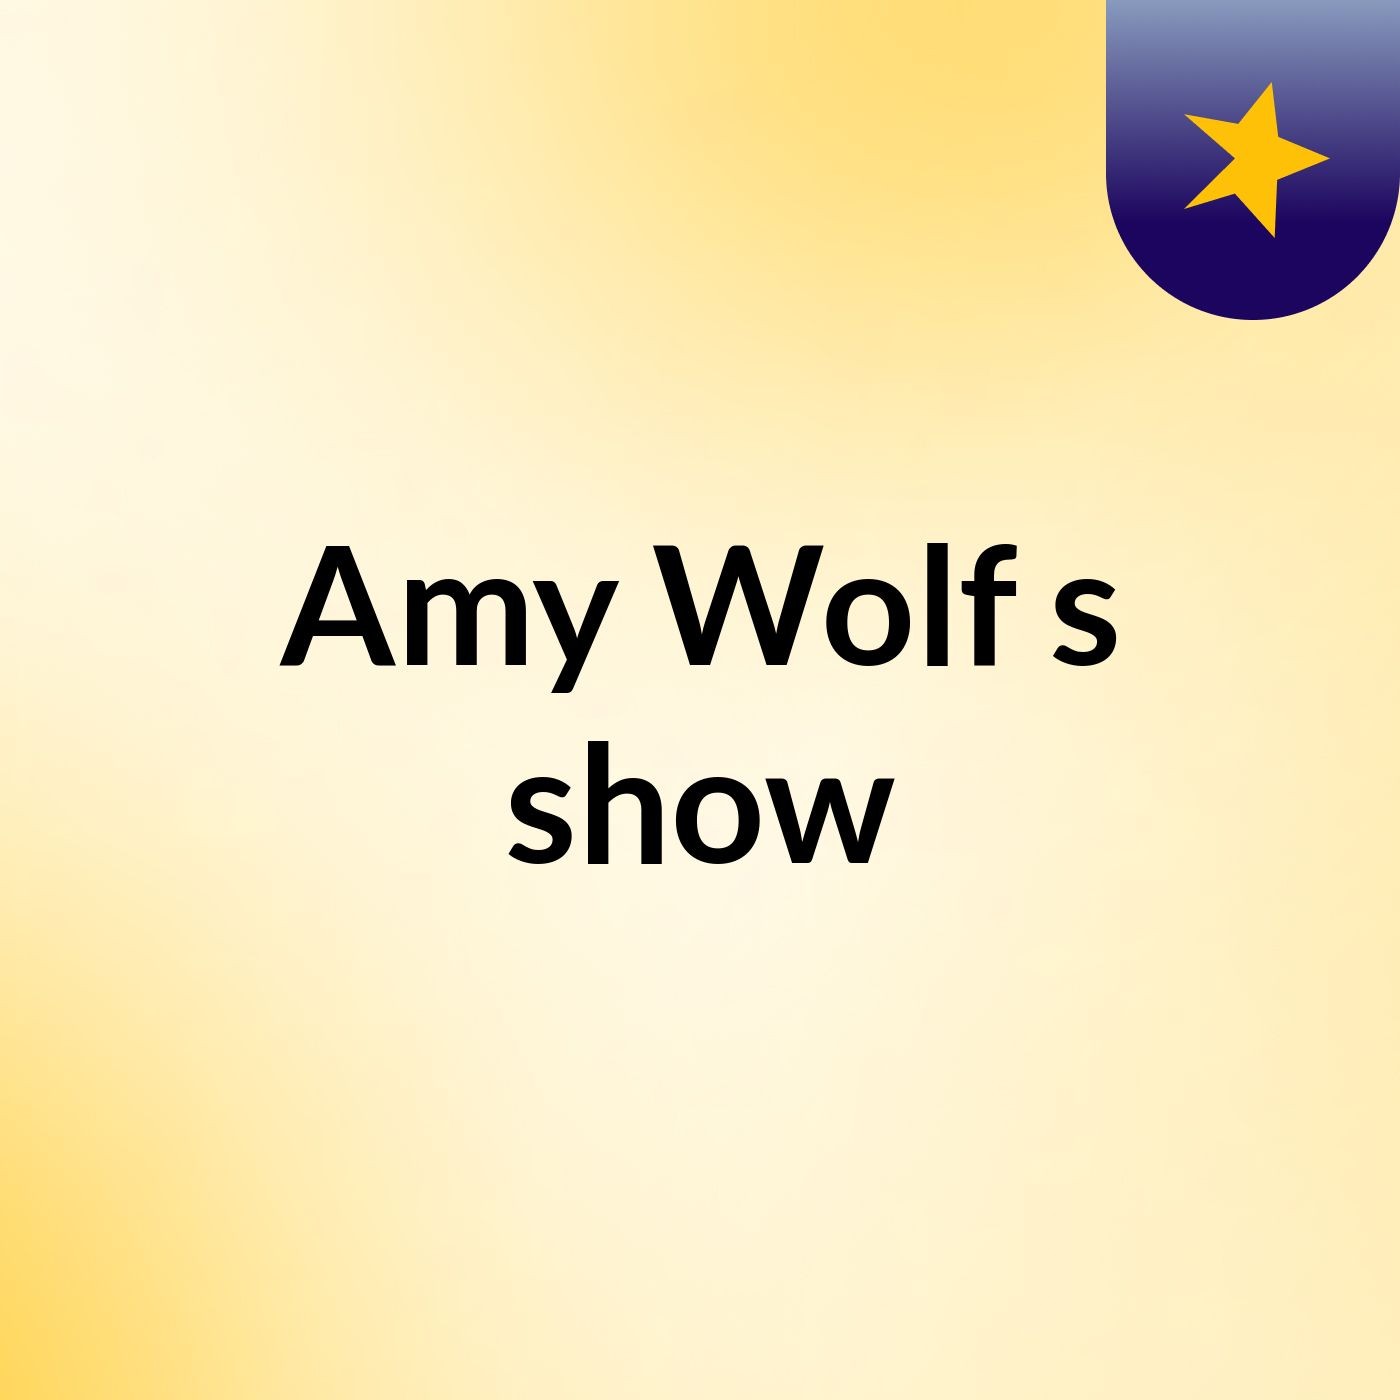 Amy Wolf's show